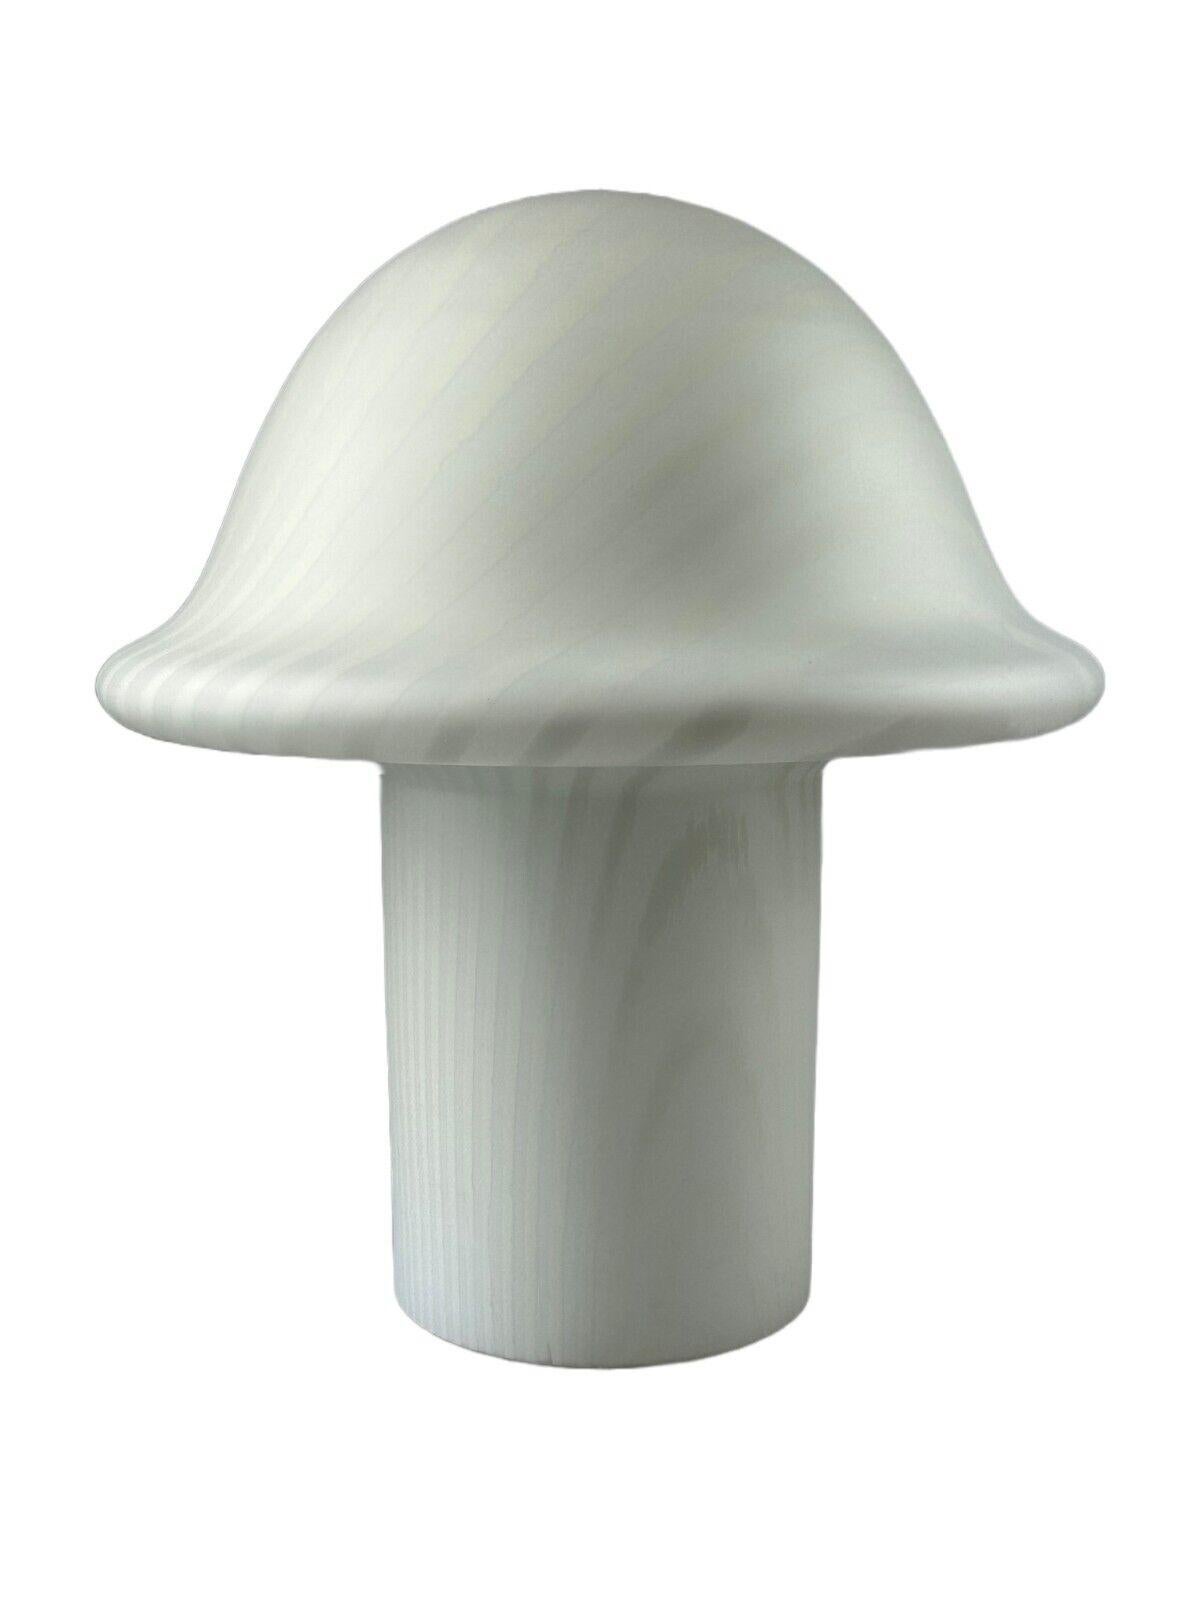 XL 60s 70s Peill & Putzler Germany Table Lamp Mushroom Glass Space Age

Object: table lamp

Manufacturer: Peill & Putzler

Condition: good

Age: around 1960-1970

Dimensions:

Diameter = 42cm
Height = 48cm

Other notes:

E27 socket

The pictures